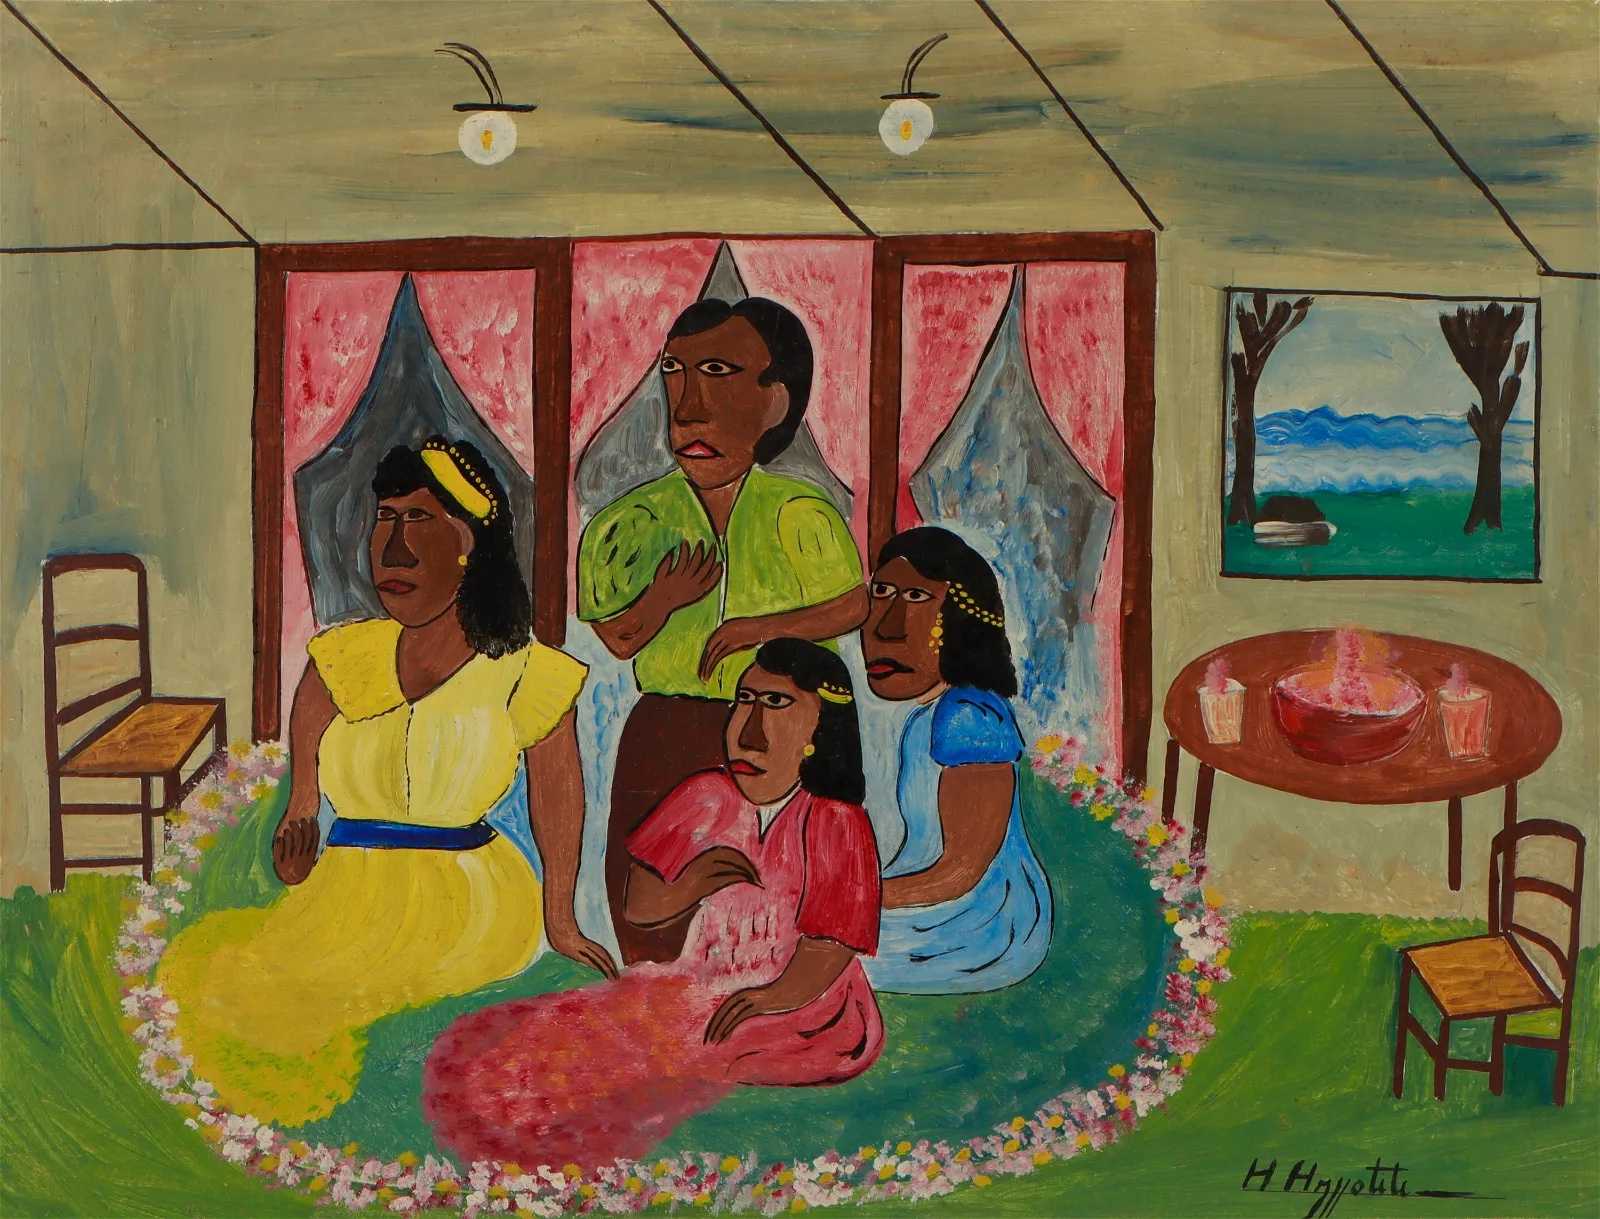 Hector Hyppolite, 'Self-Portrait with Family,' estimated at $75,000-$100,000 at Material Culture.